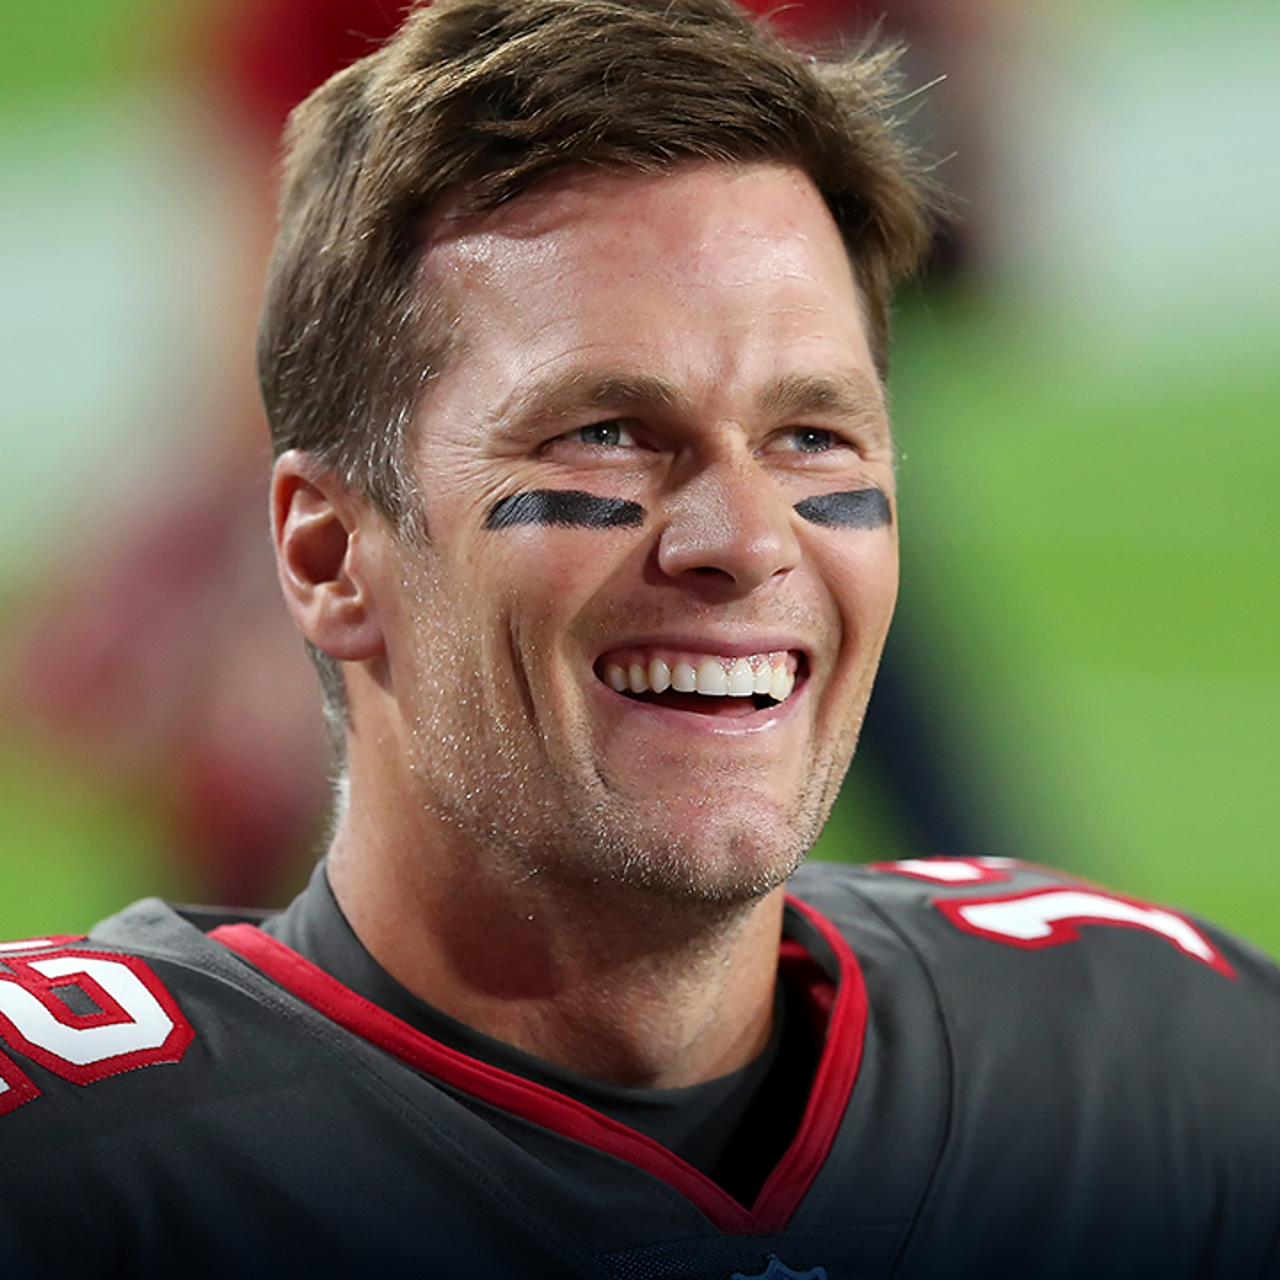 Tom Brady Signing With San Francisco 49ers Is 'IN PLAY' Per Colin Cowherd